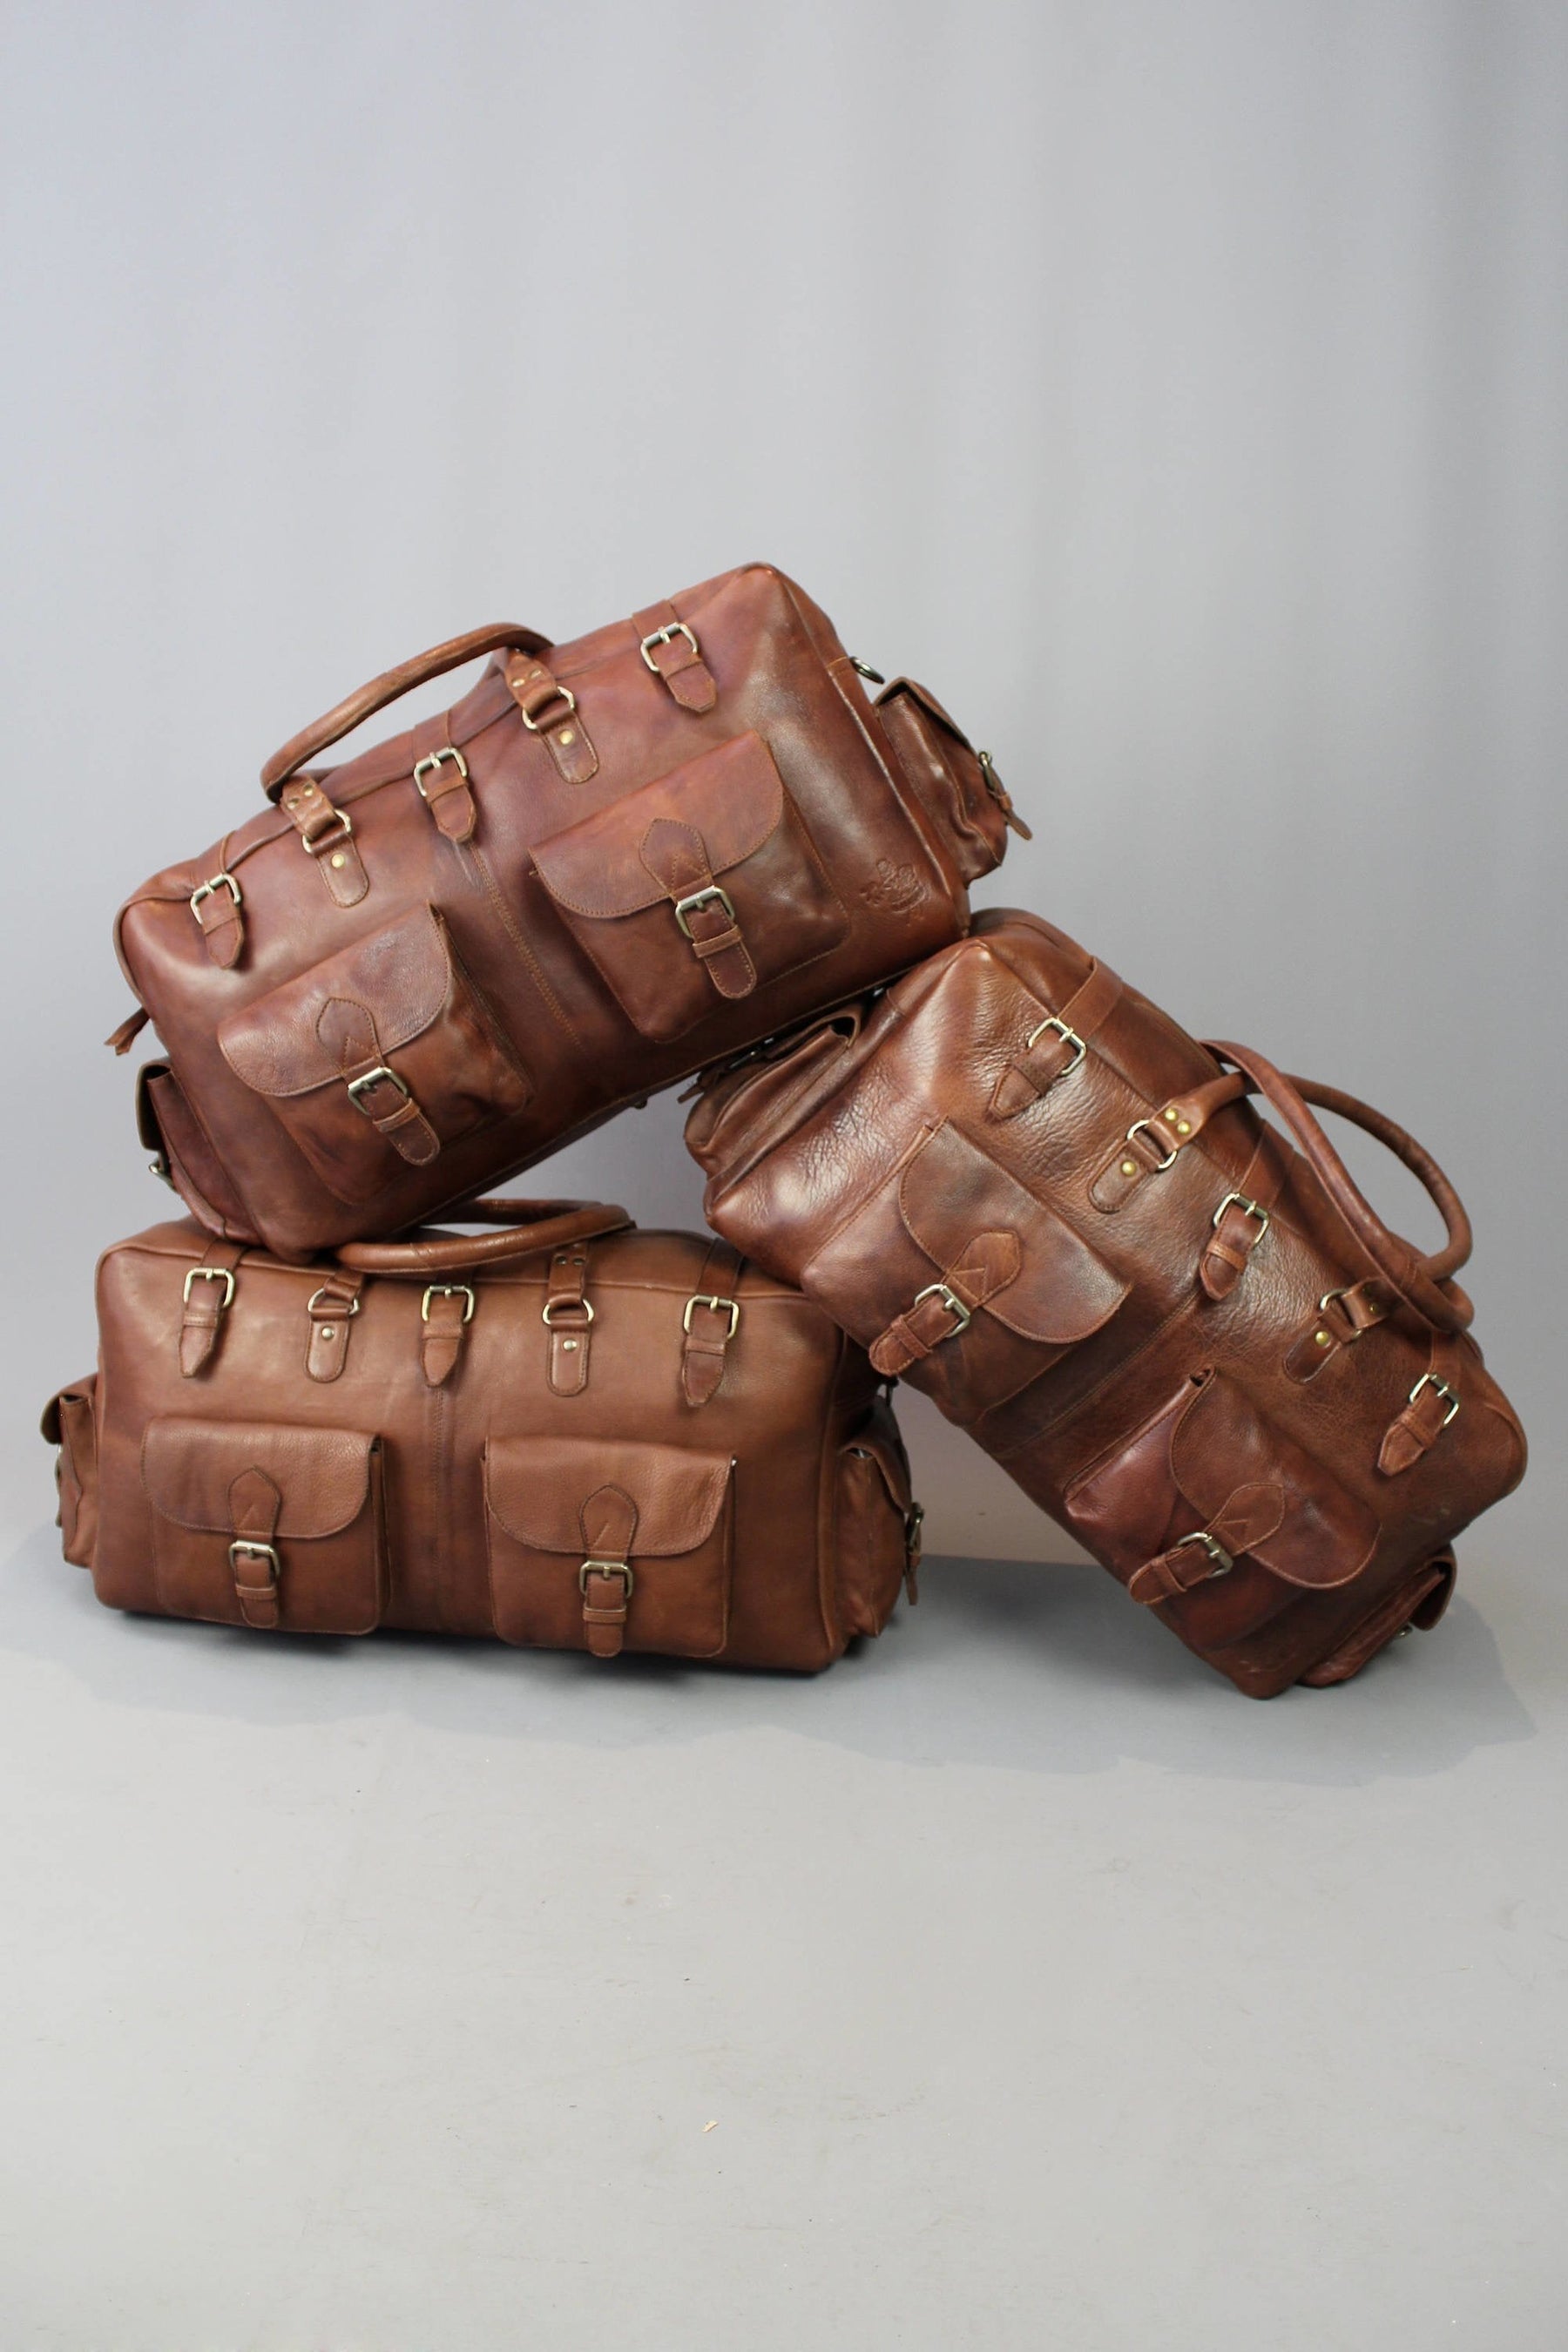 OES Travel Bag - Conker Brown Leather - Bricks Masons